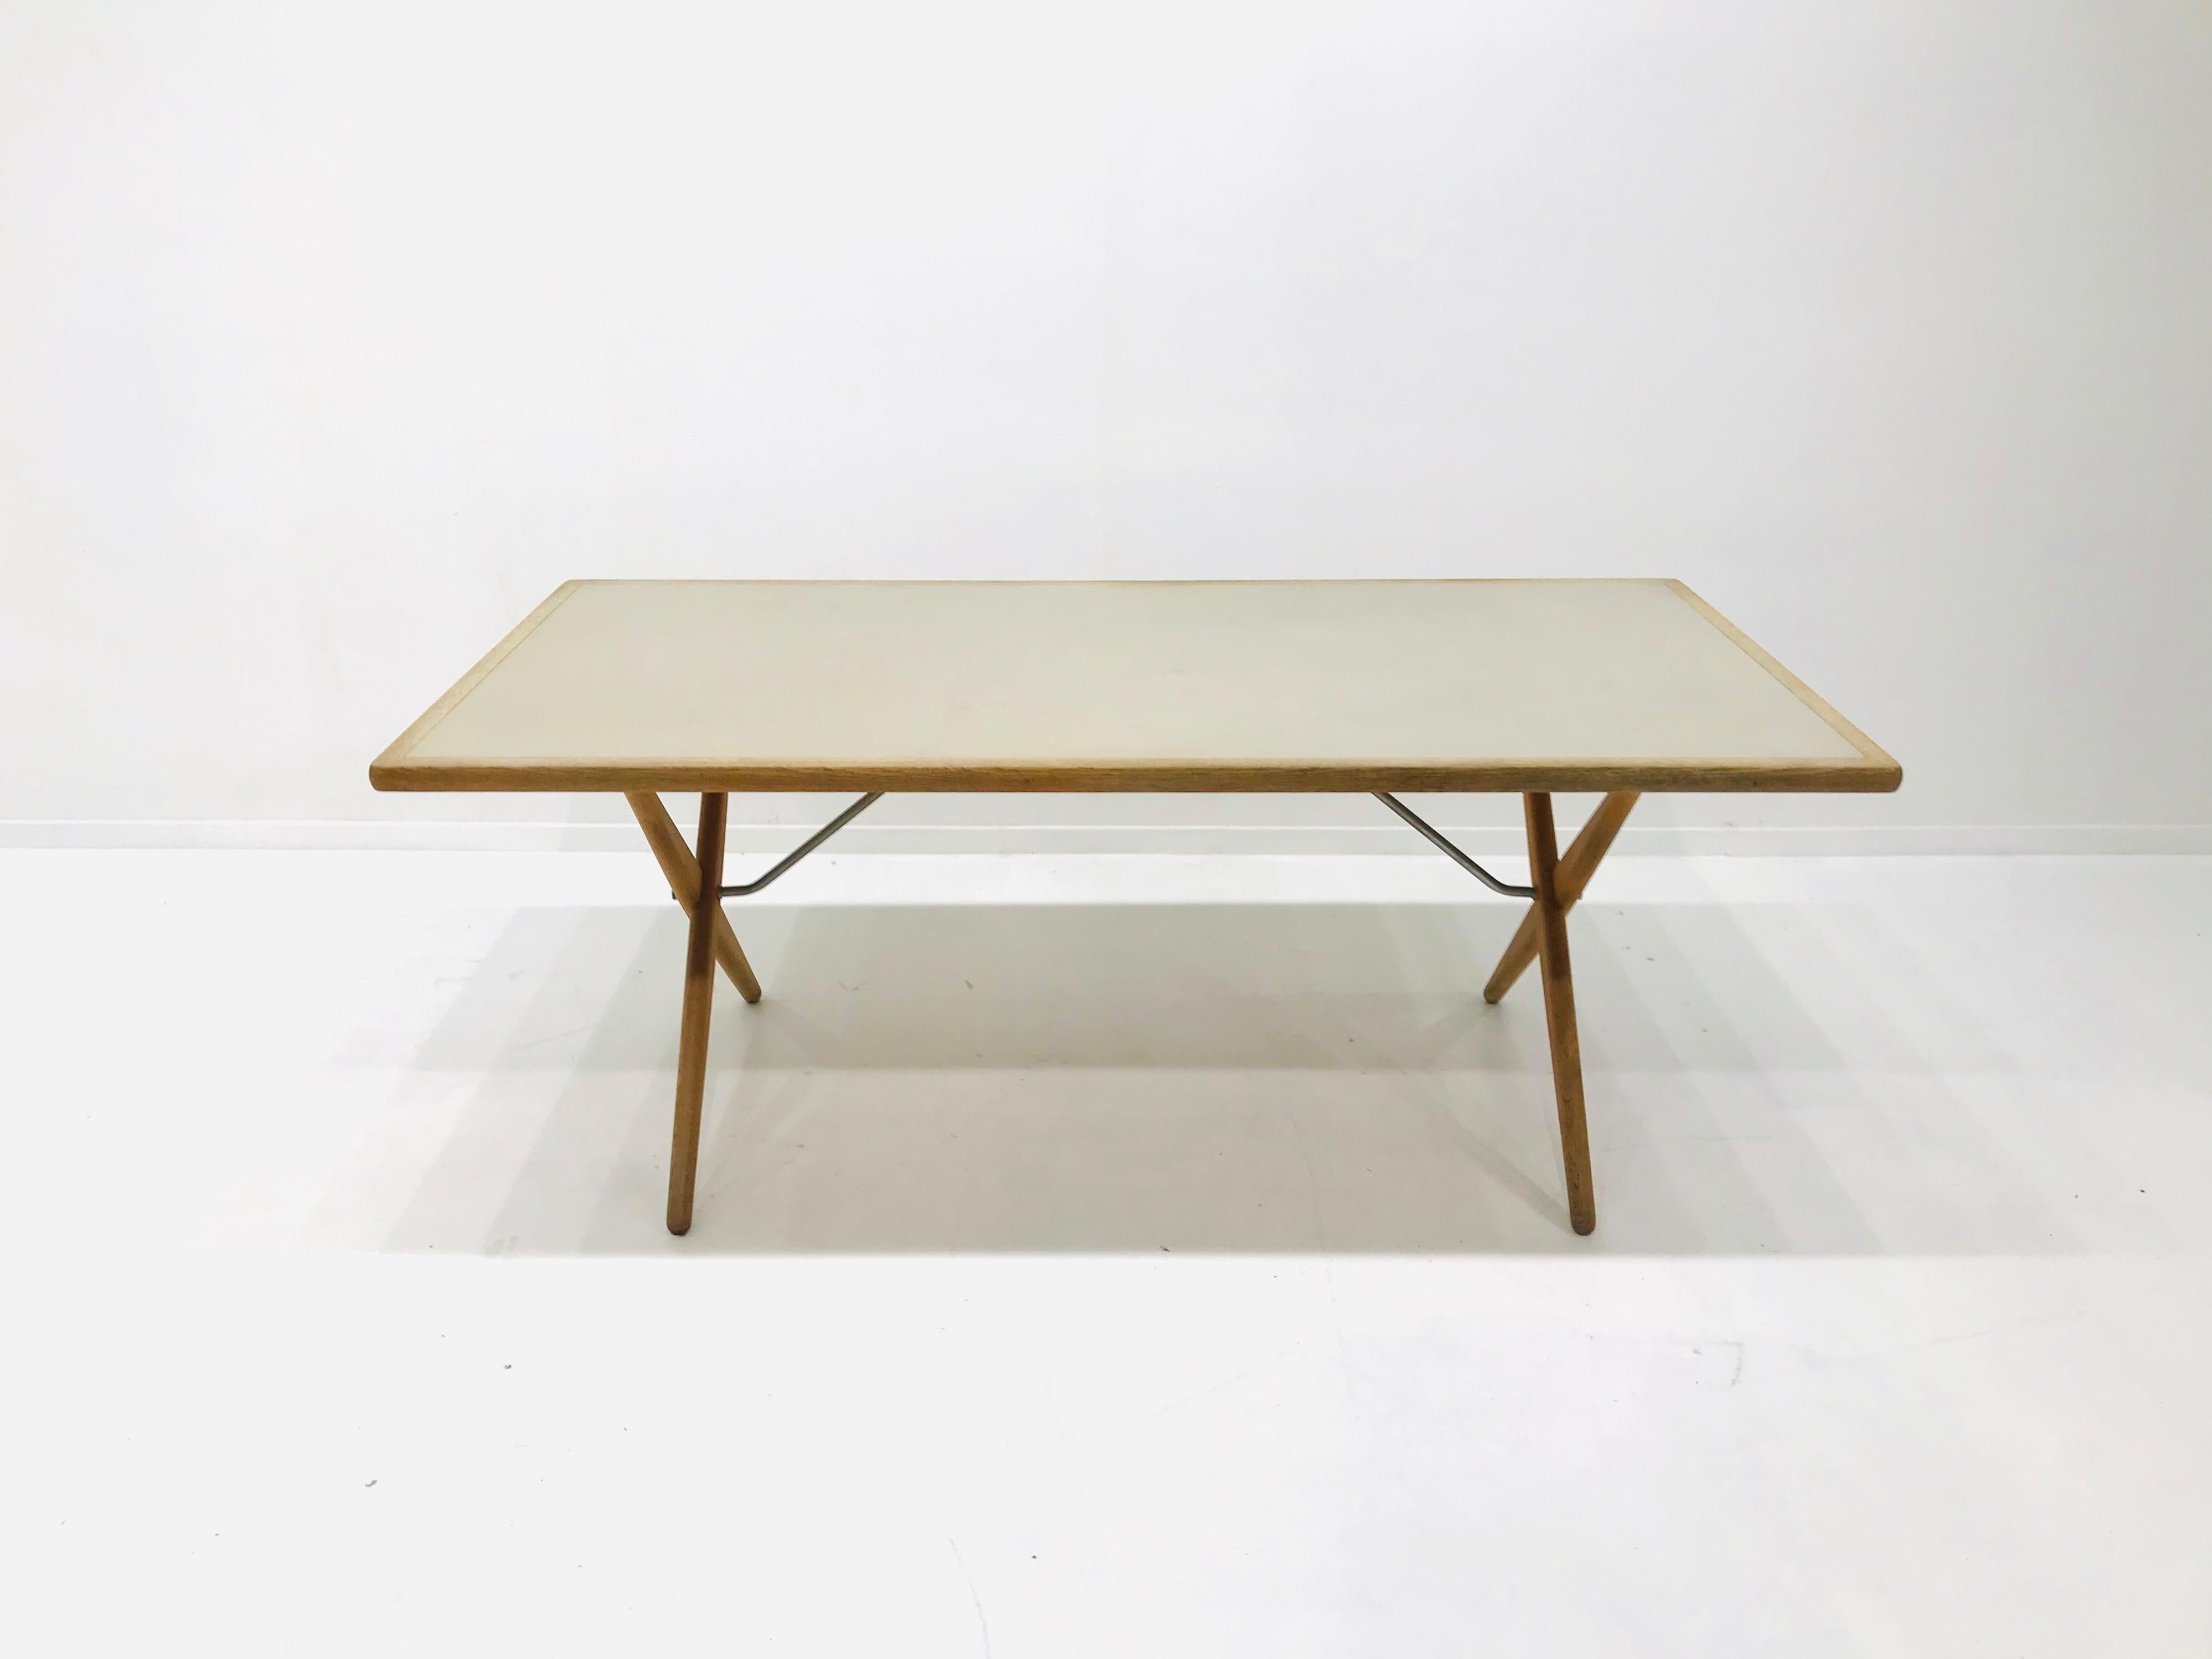 This rare dining table or writingdesk model AT303 was designed by Hans J. Wegner in the 1950s. 
The oak tabletop features a light grey linoleum inlay in very good condition. The tabletop is supported by 2 solid crossed oak legs each connected with